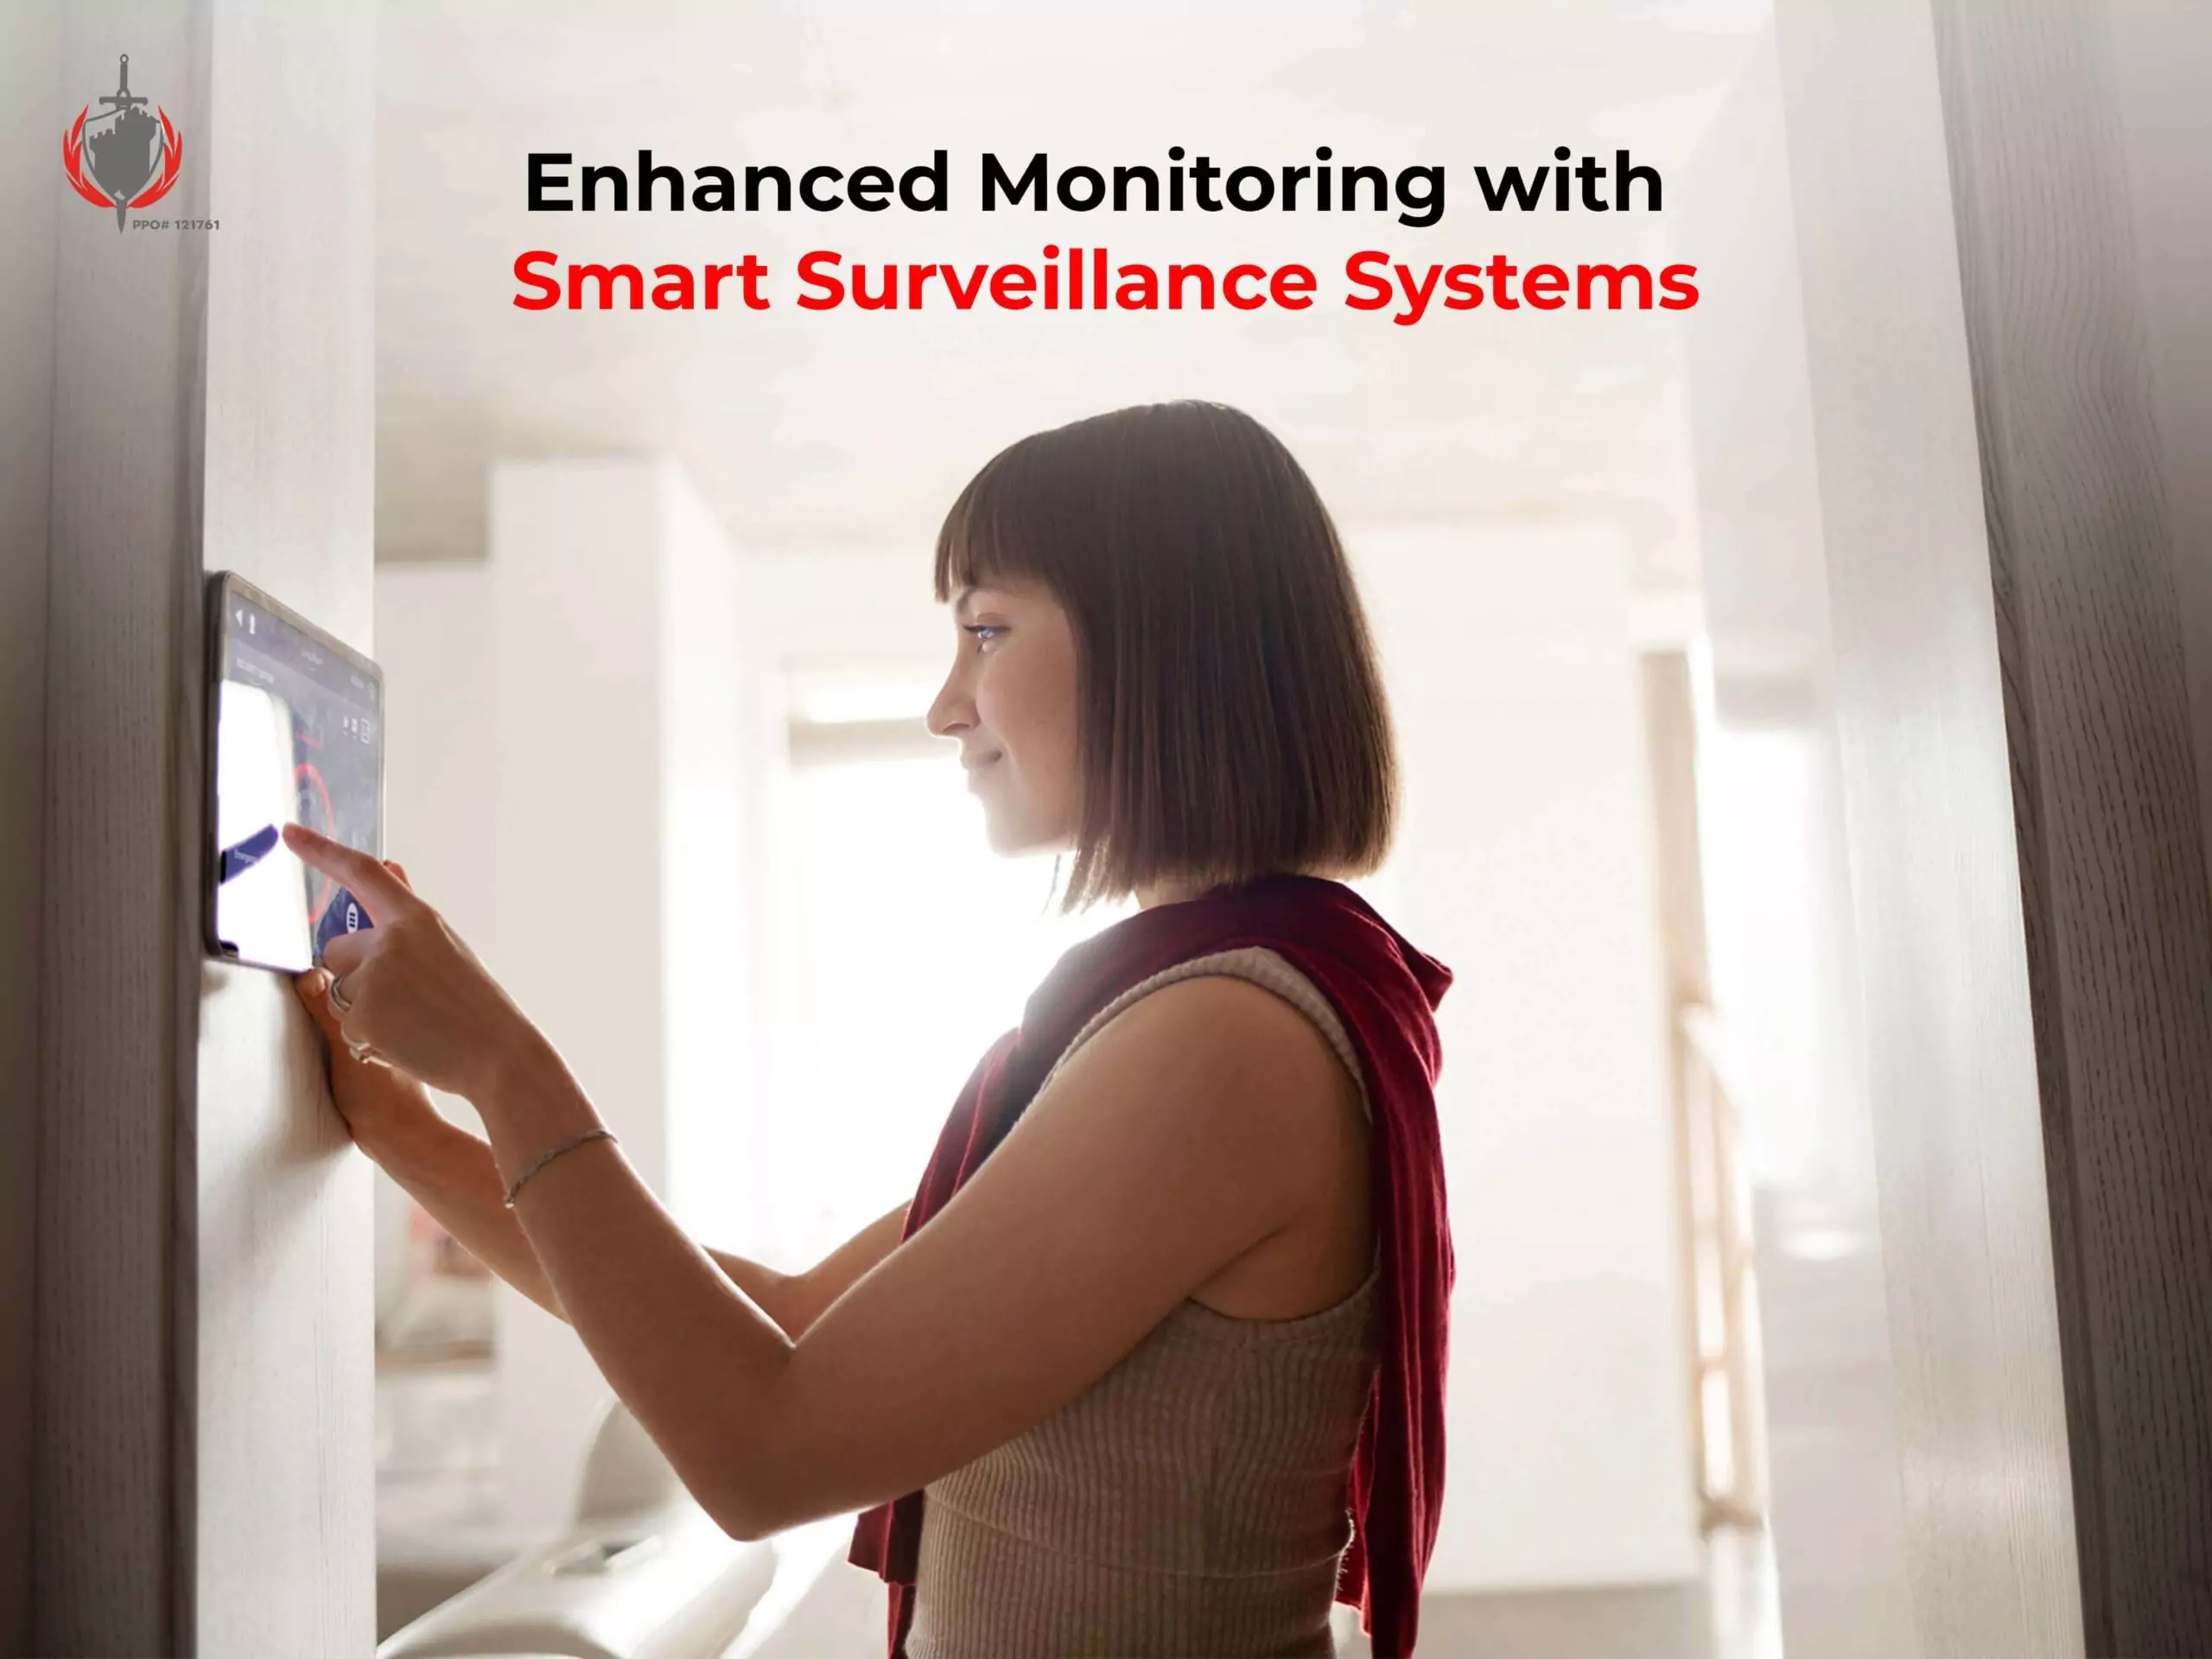 Enhanced Monitoring with Smart Surveillance Systems